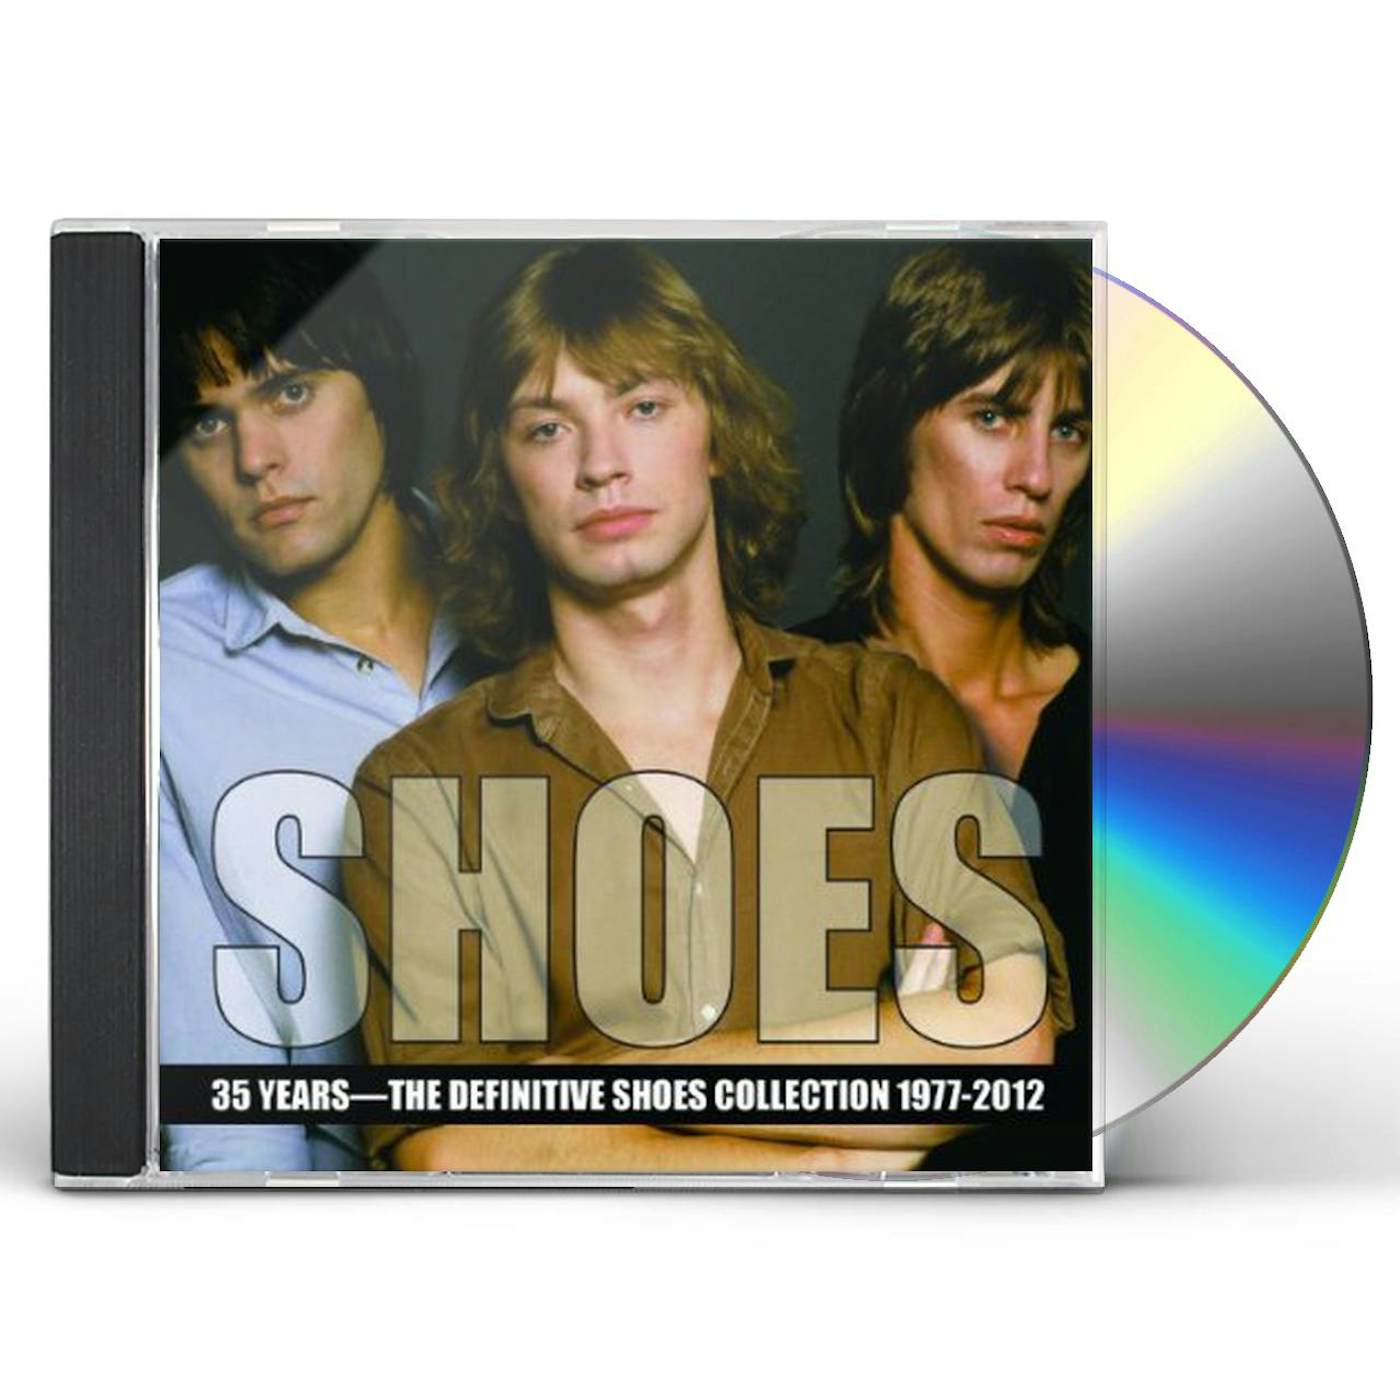 35 YEARS: DEFINITIVE SHOES COLLECTION 1977-2012 CD